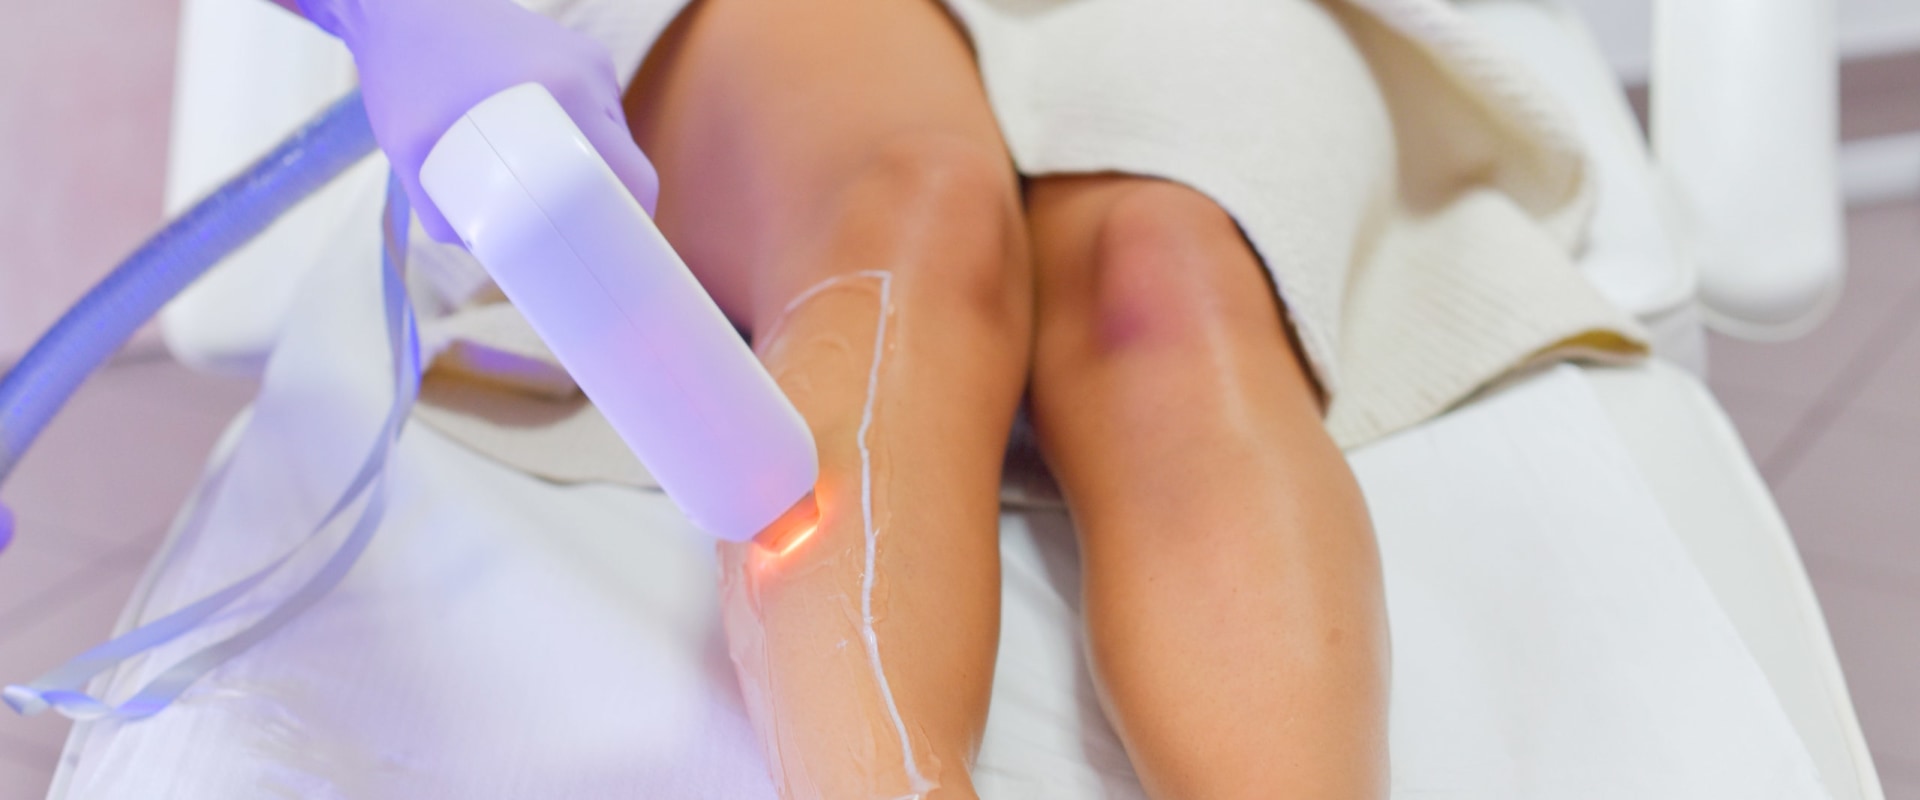 Laser Hair Removal Benefits: Increased Body Confidence